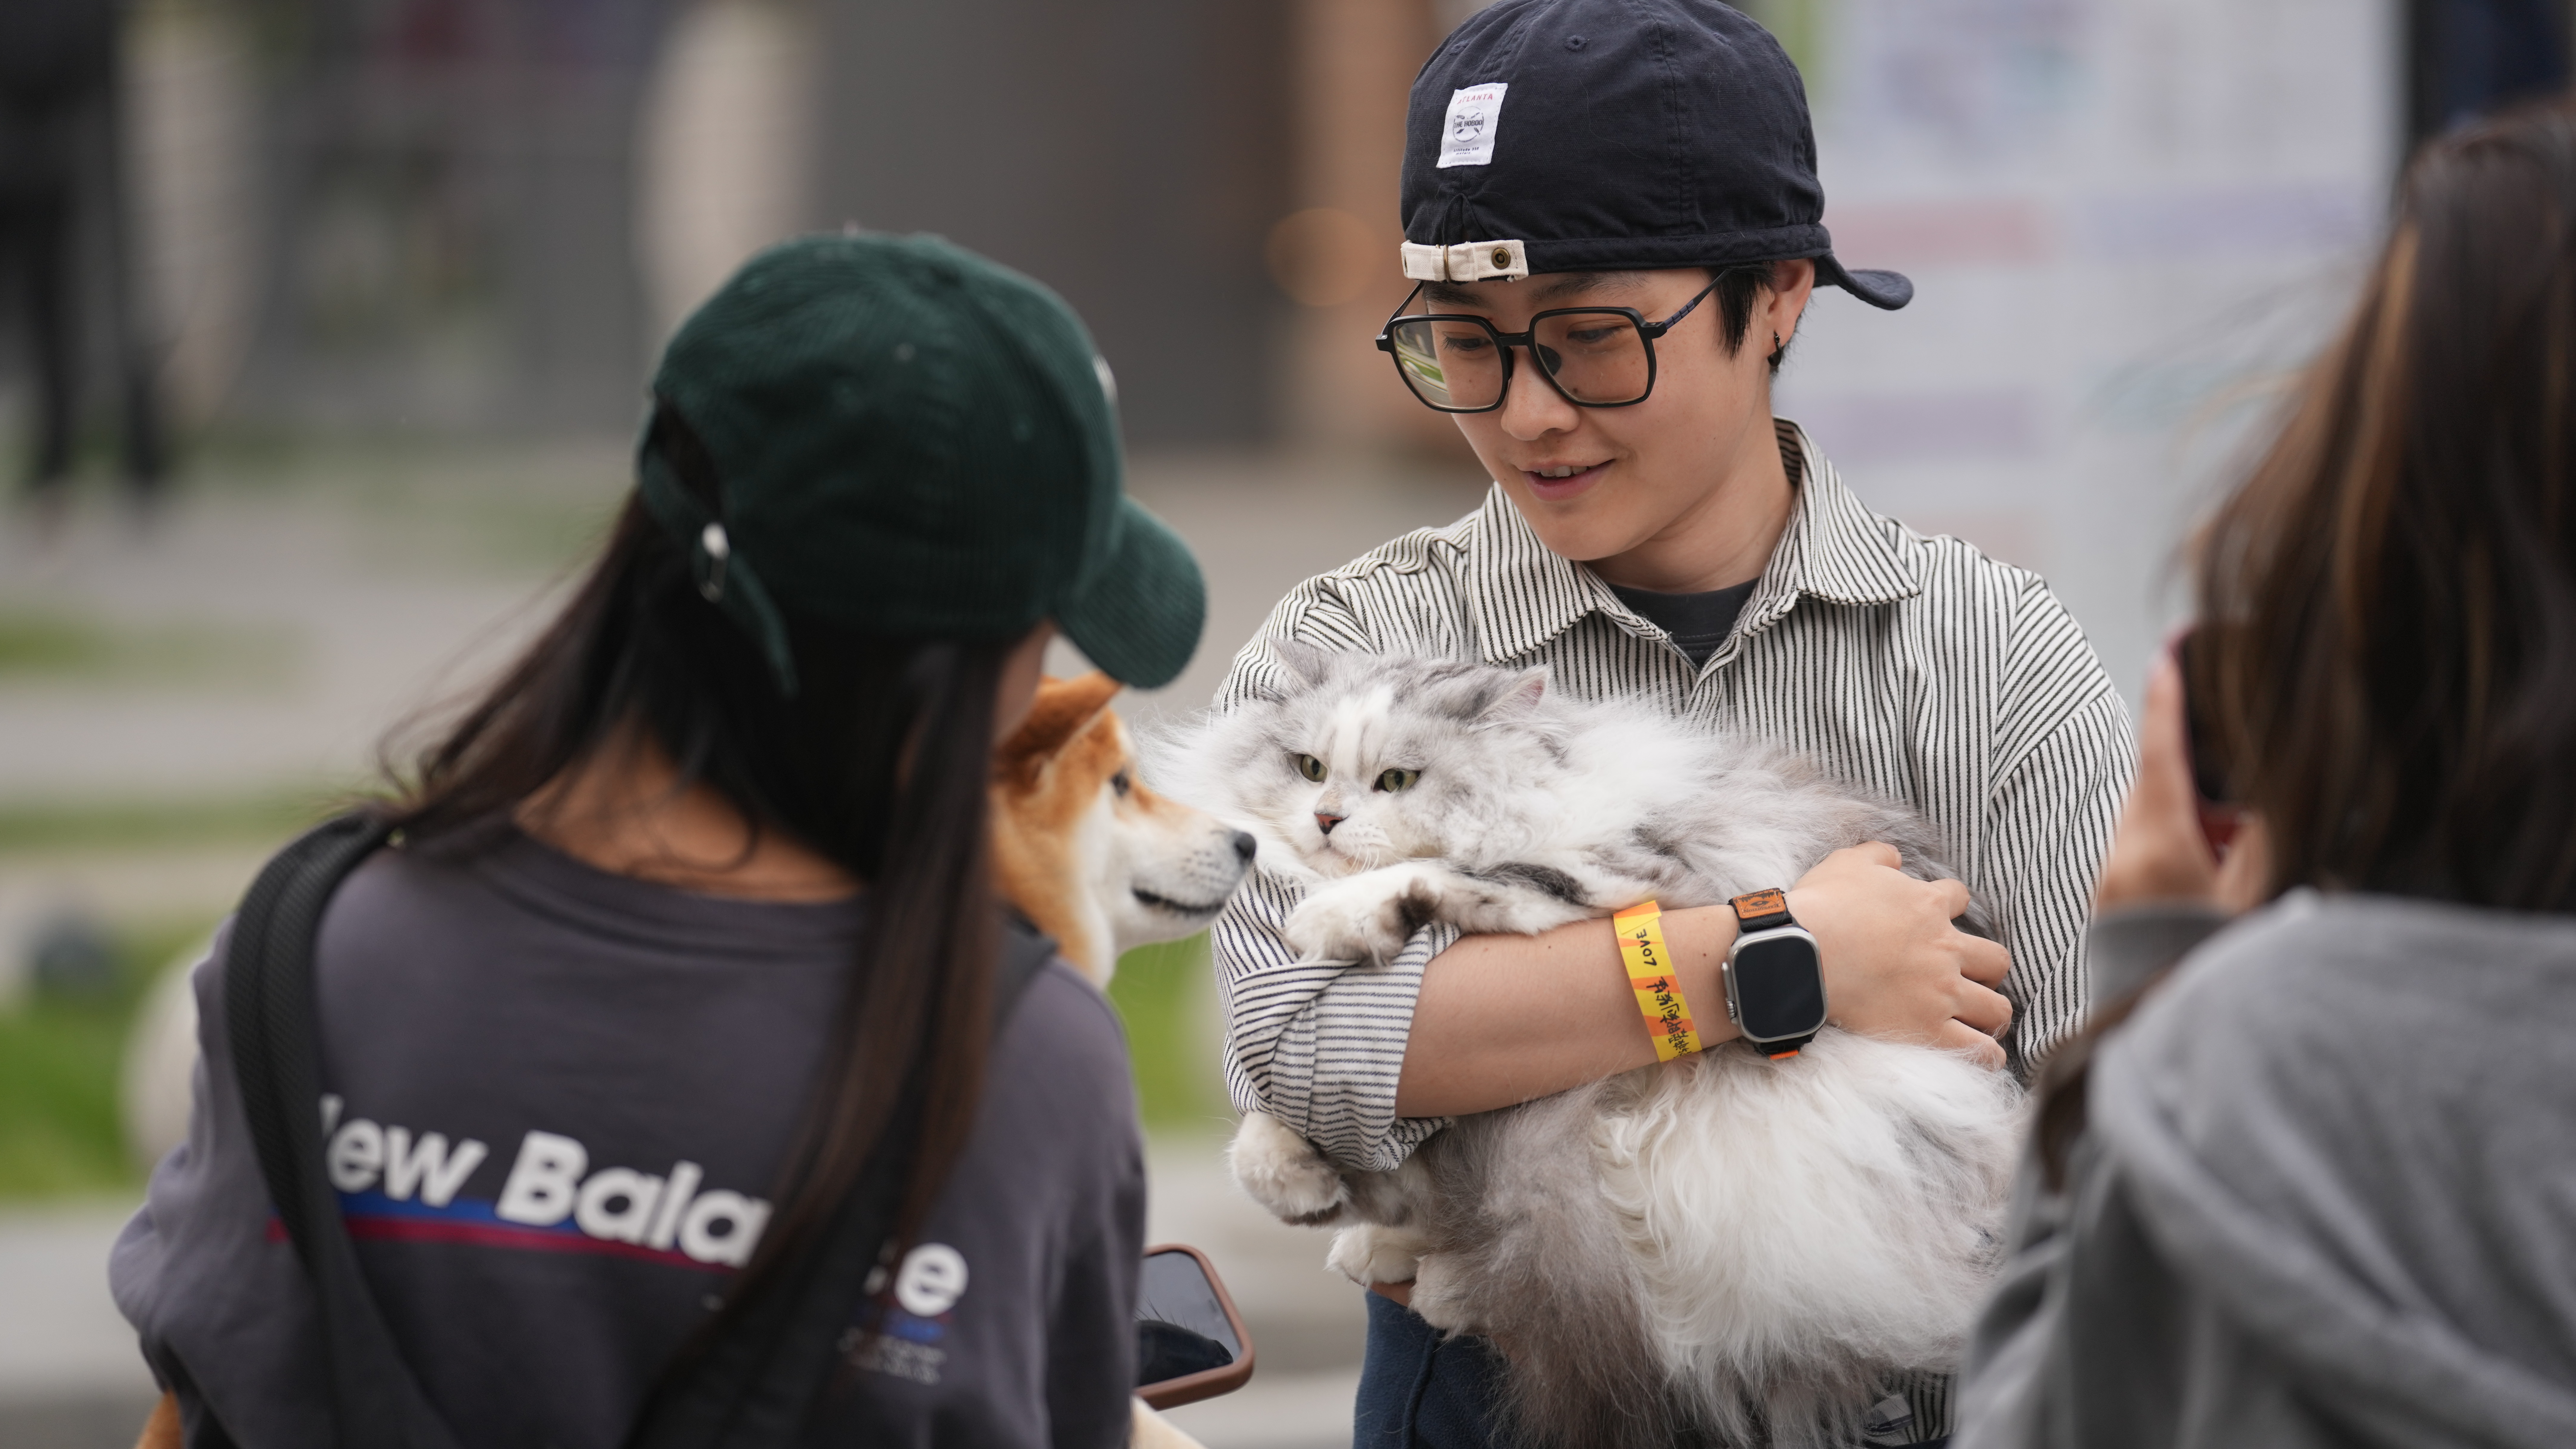 Pet owners greet each other in Beijing. /Chen Bo